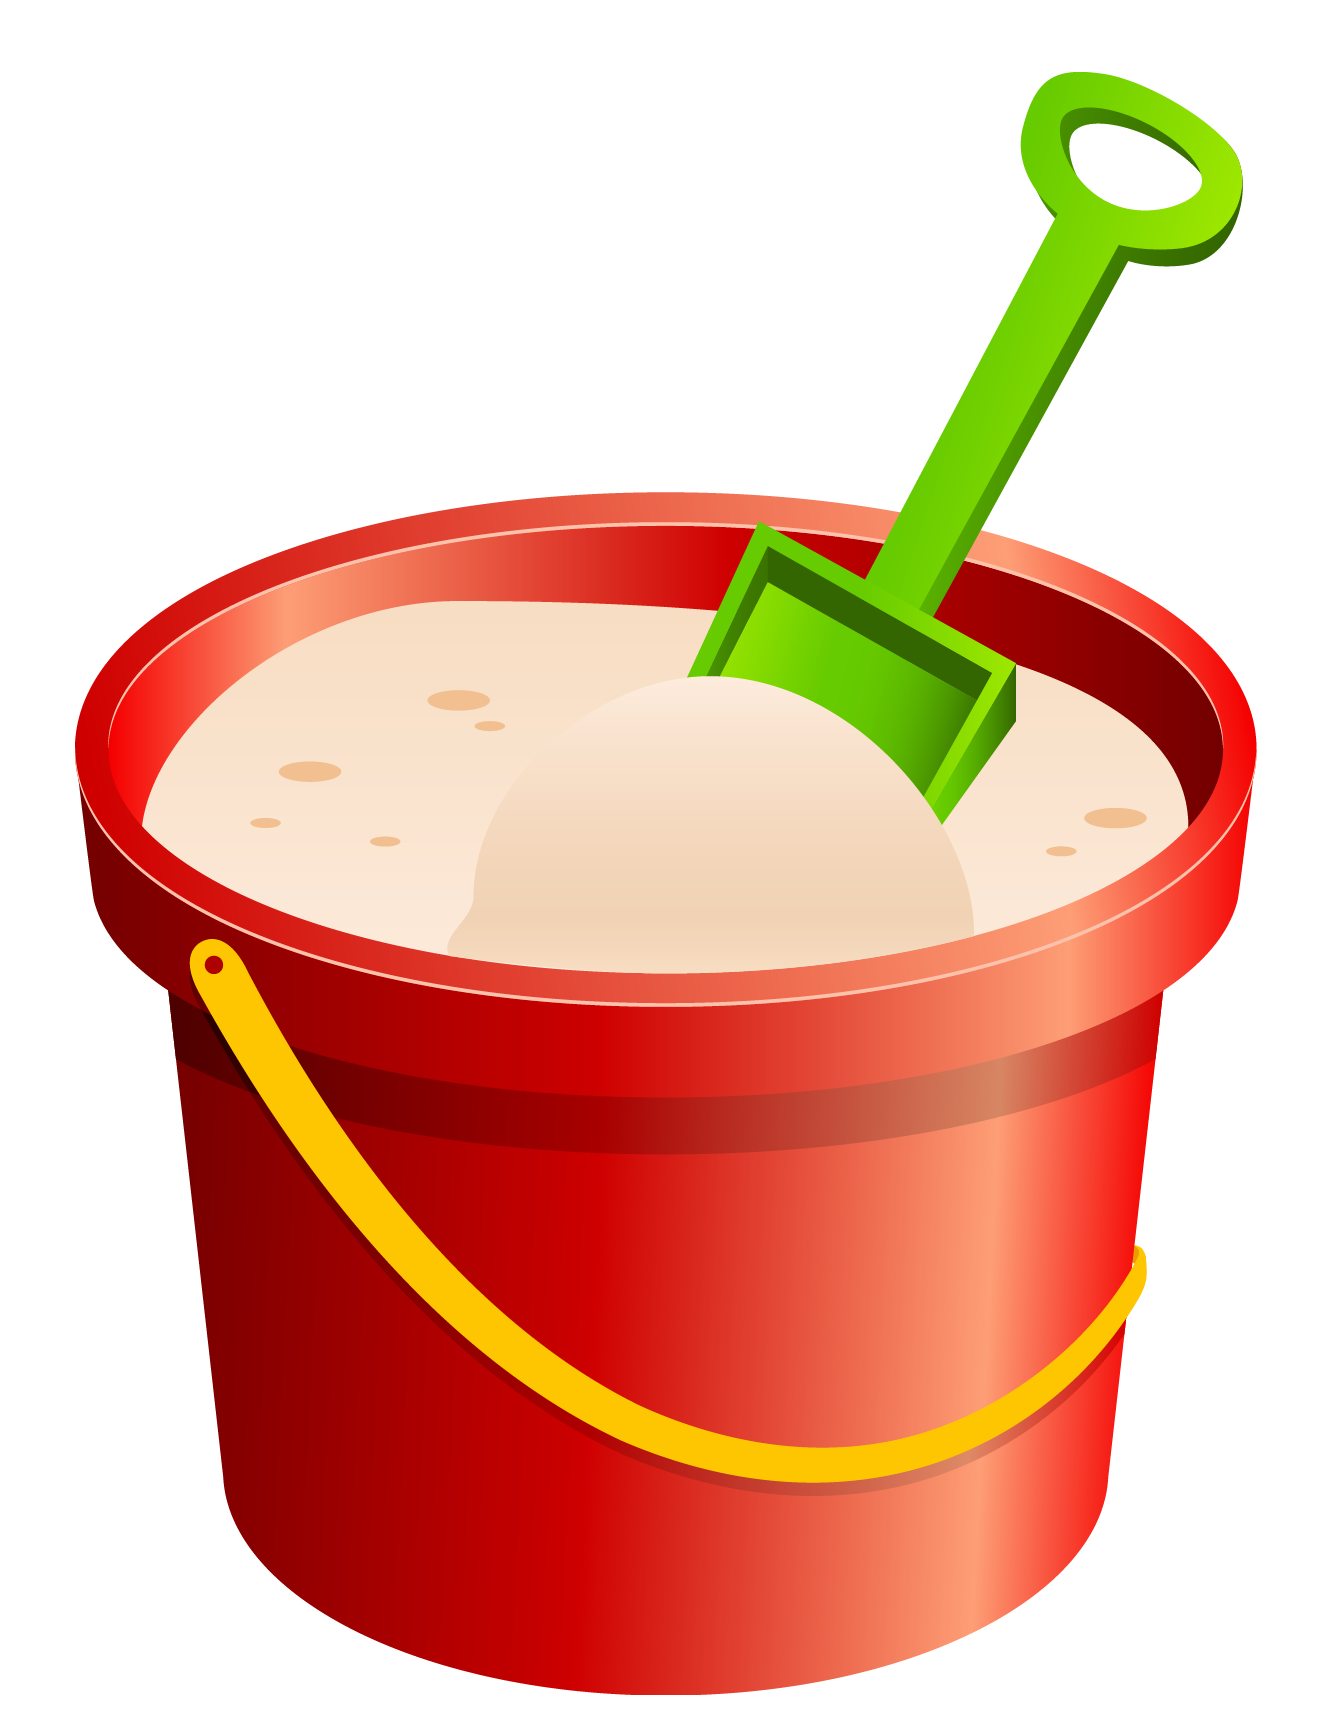 Green clipart pail. Red sand bucket and